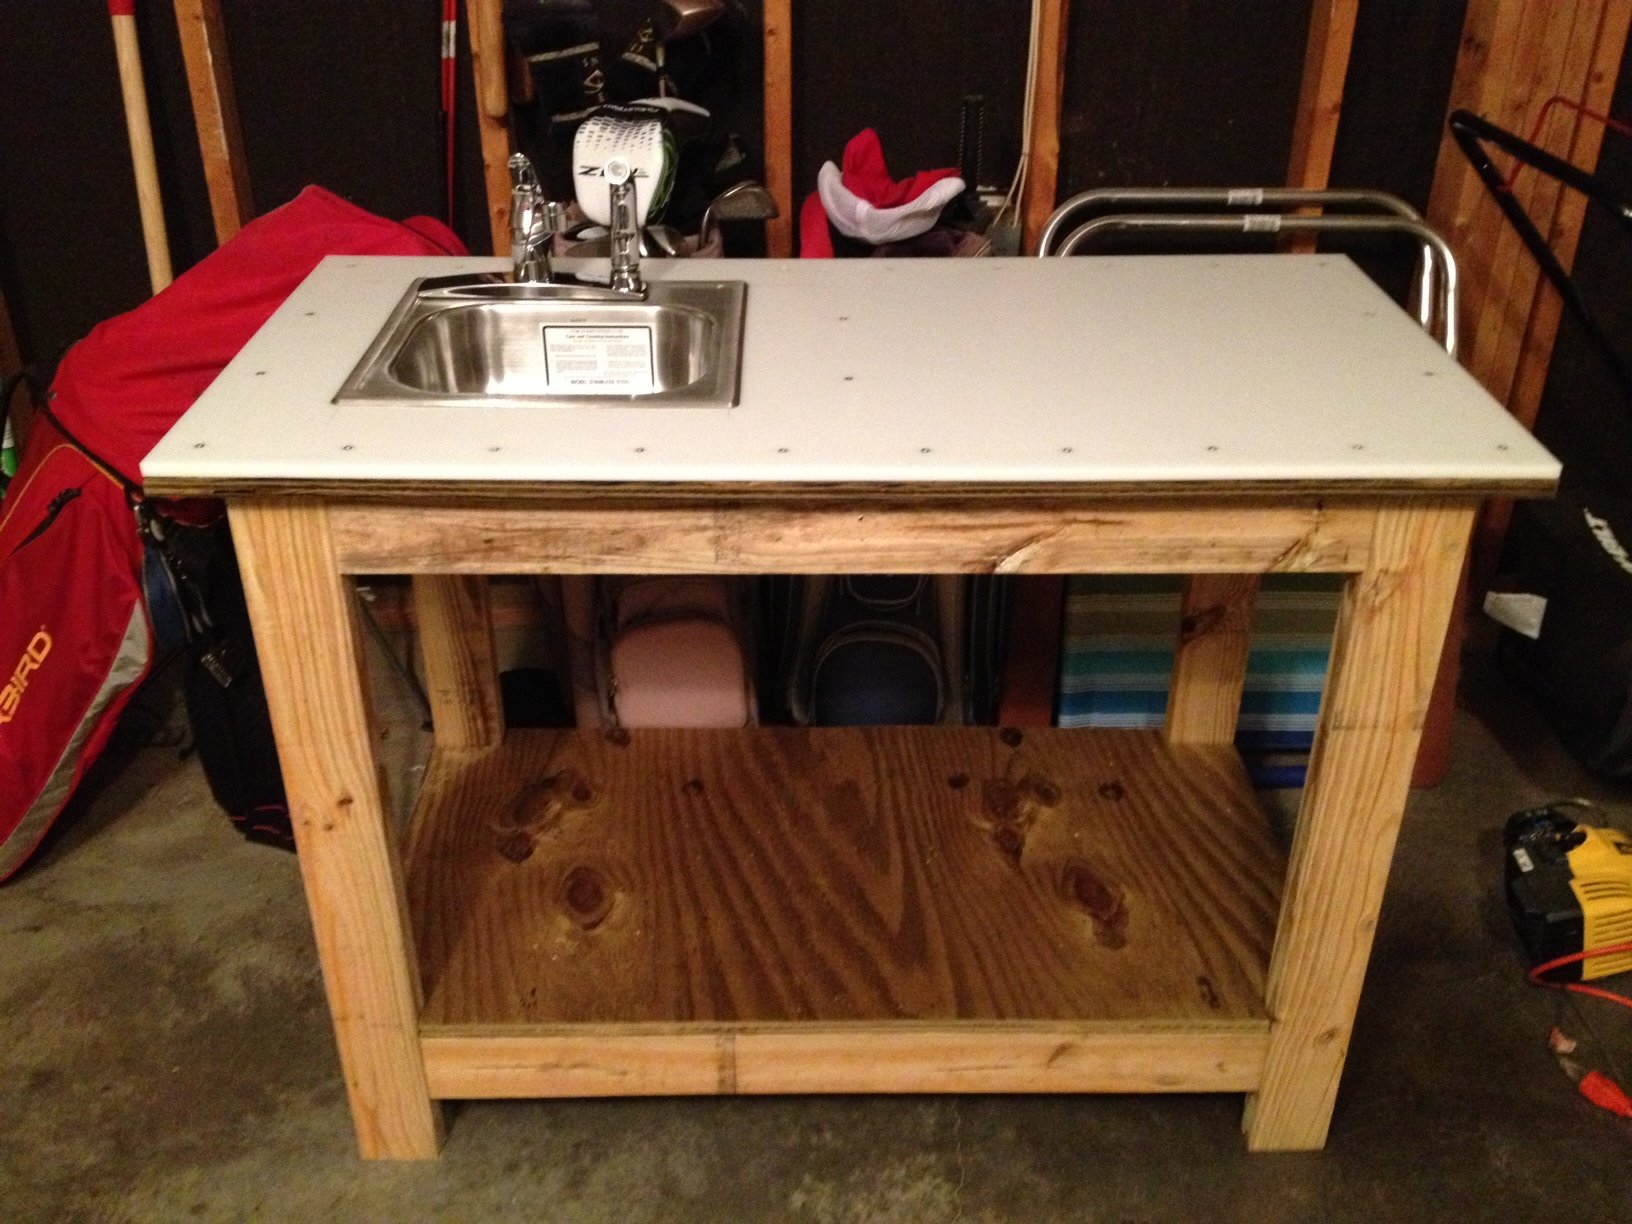 Kreg Jig work bench with with a twist (fish cleaning table for the